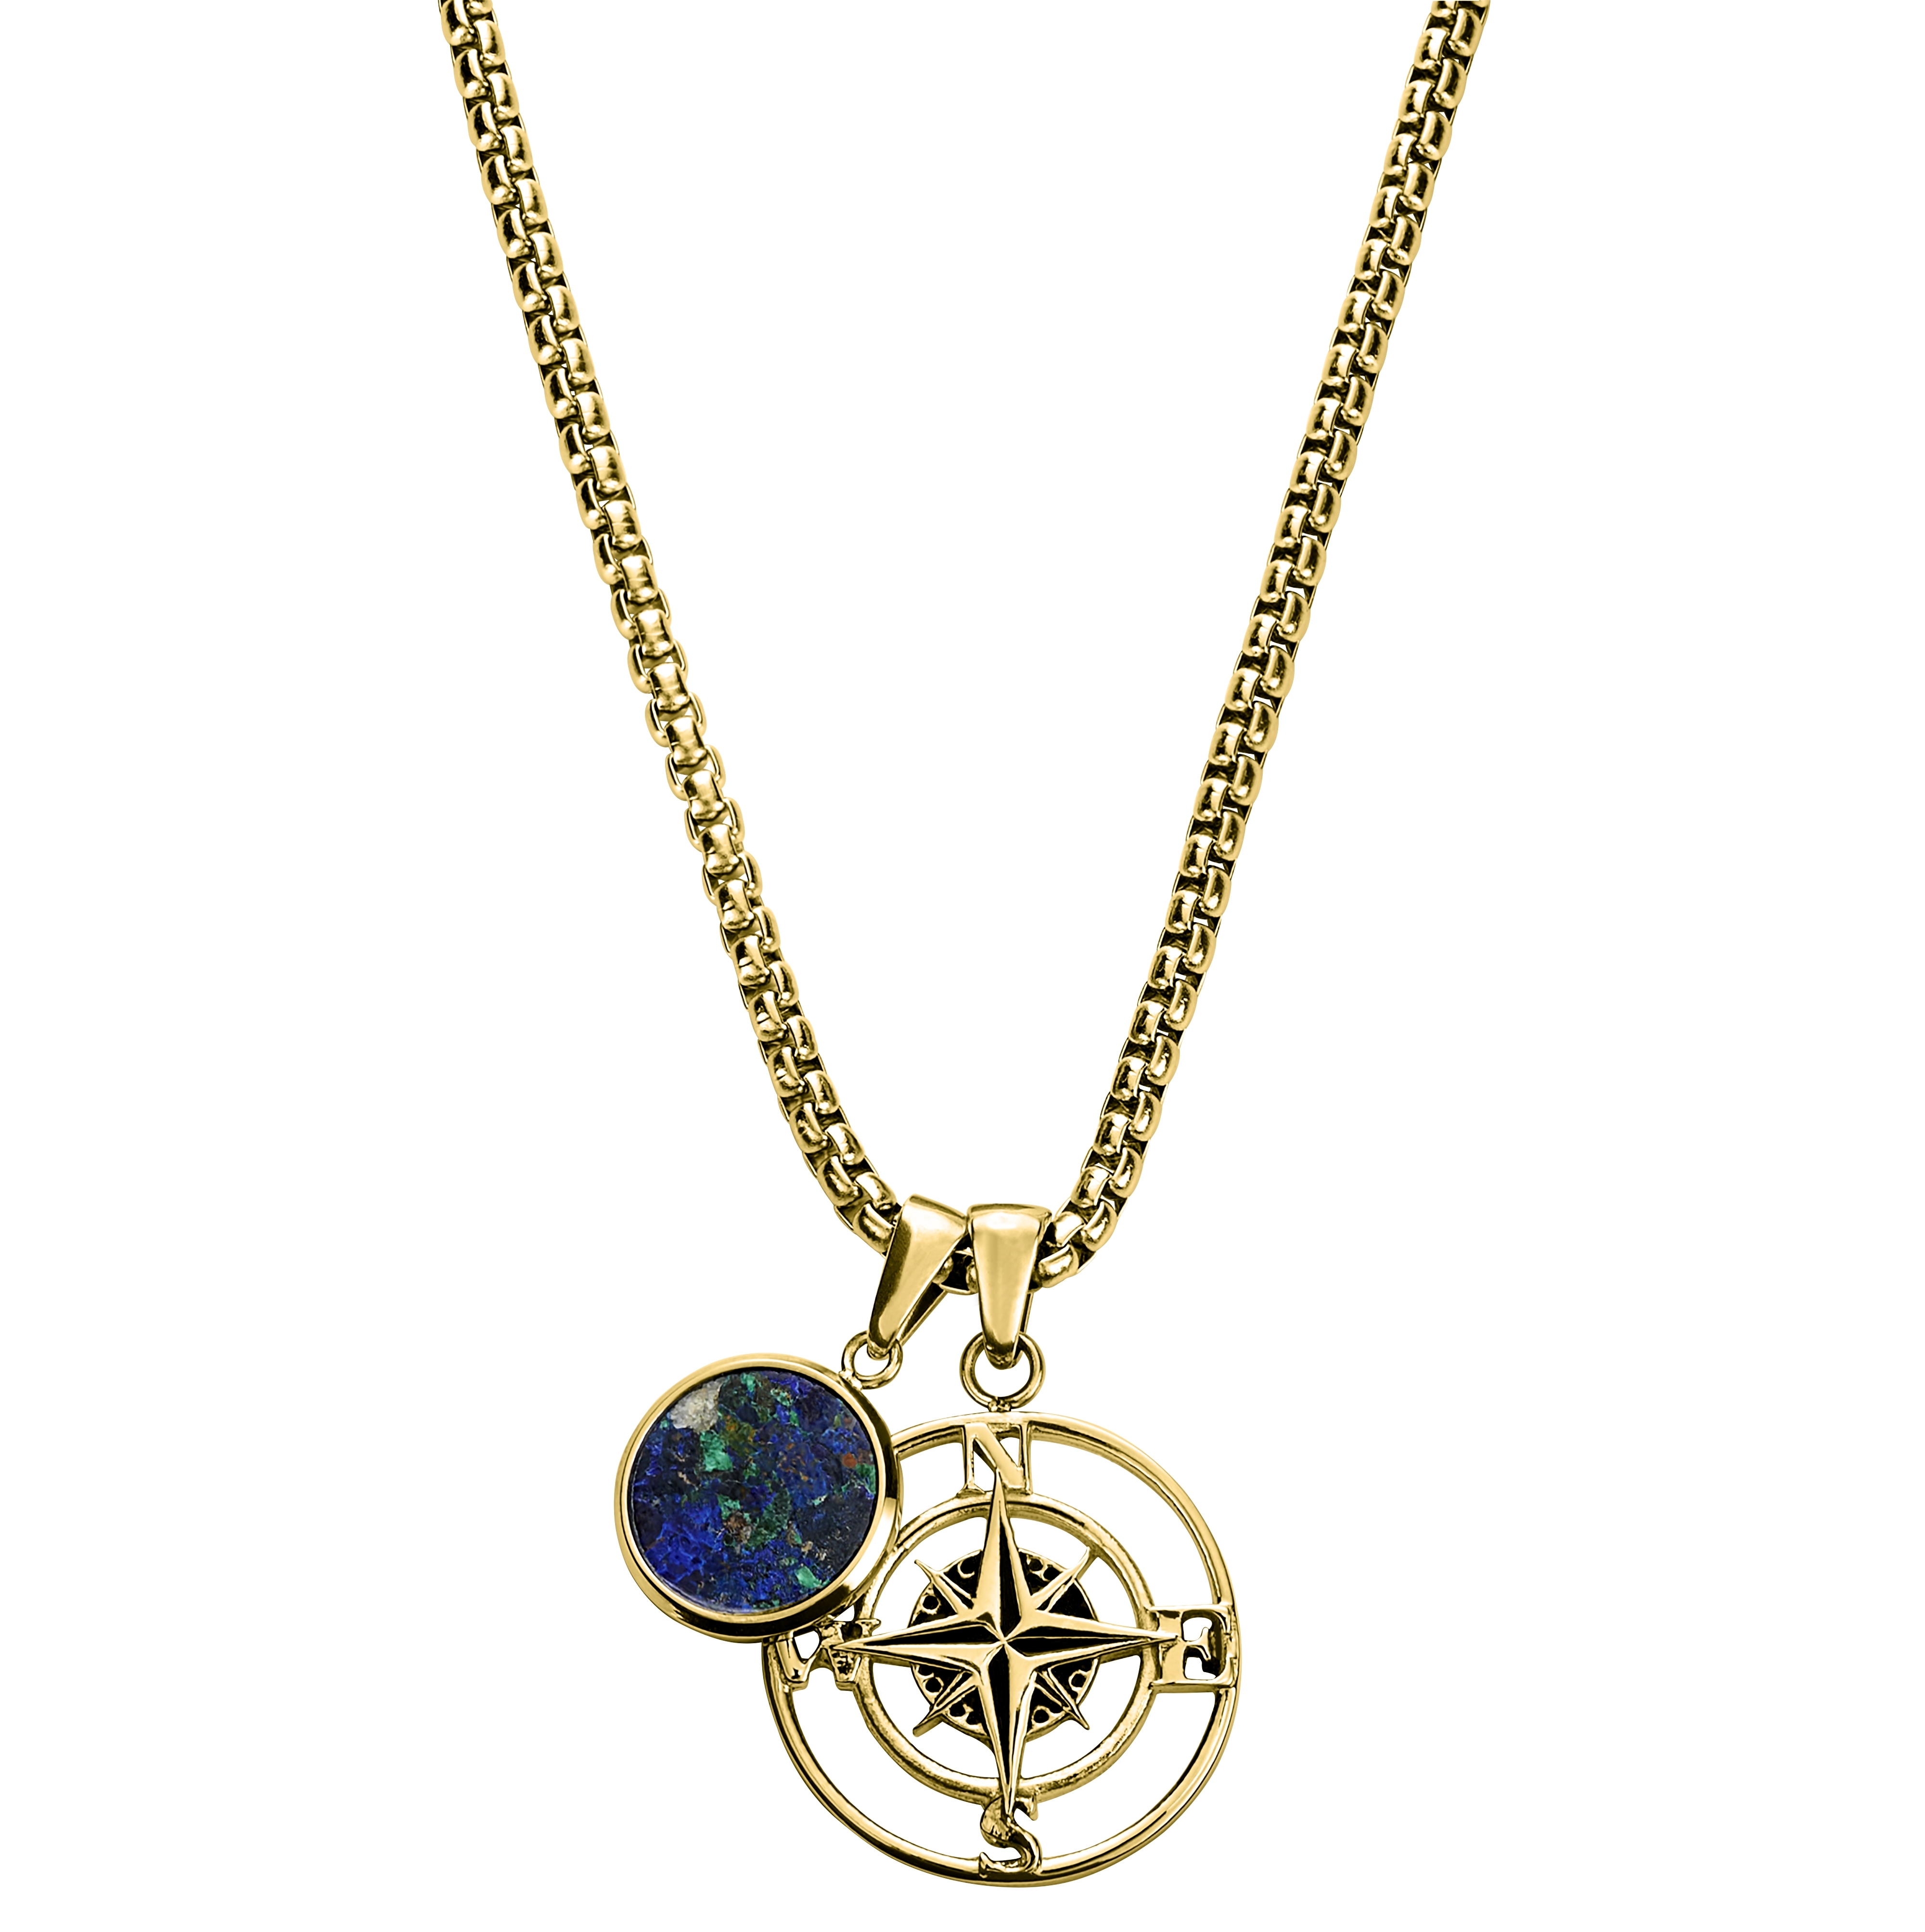 Women's Compass Necklace with Coordinates by Talisa - Coordinates Necklace